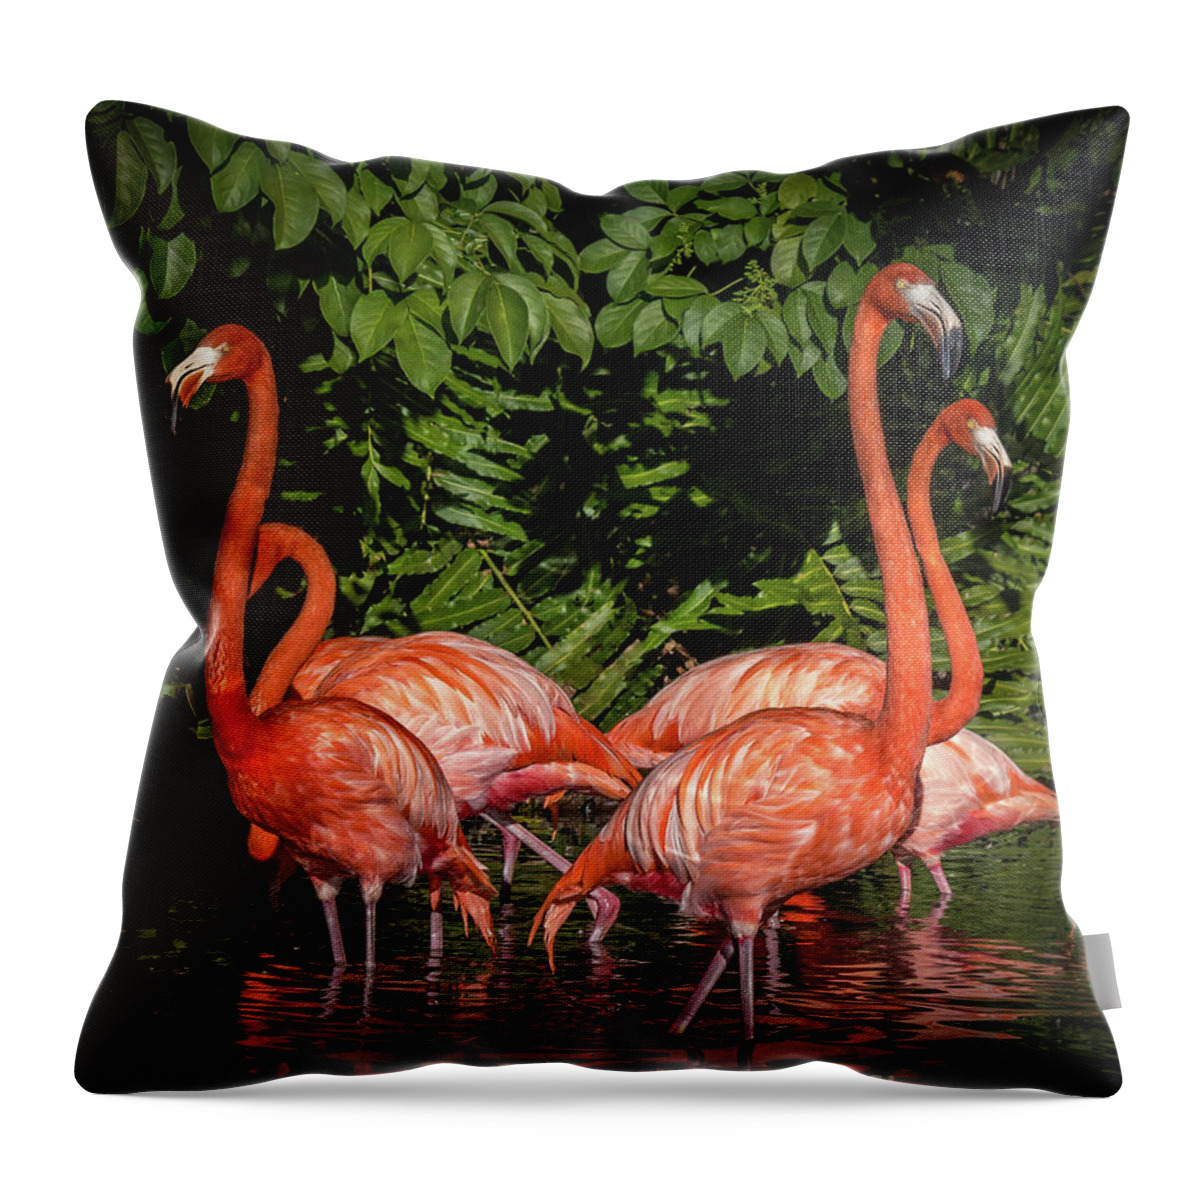 Black Background Throw Pillow featuring the photograph Flamingo Tropical Paradise 2 by Liesl Walsh